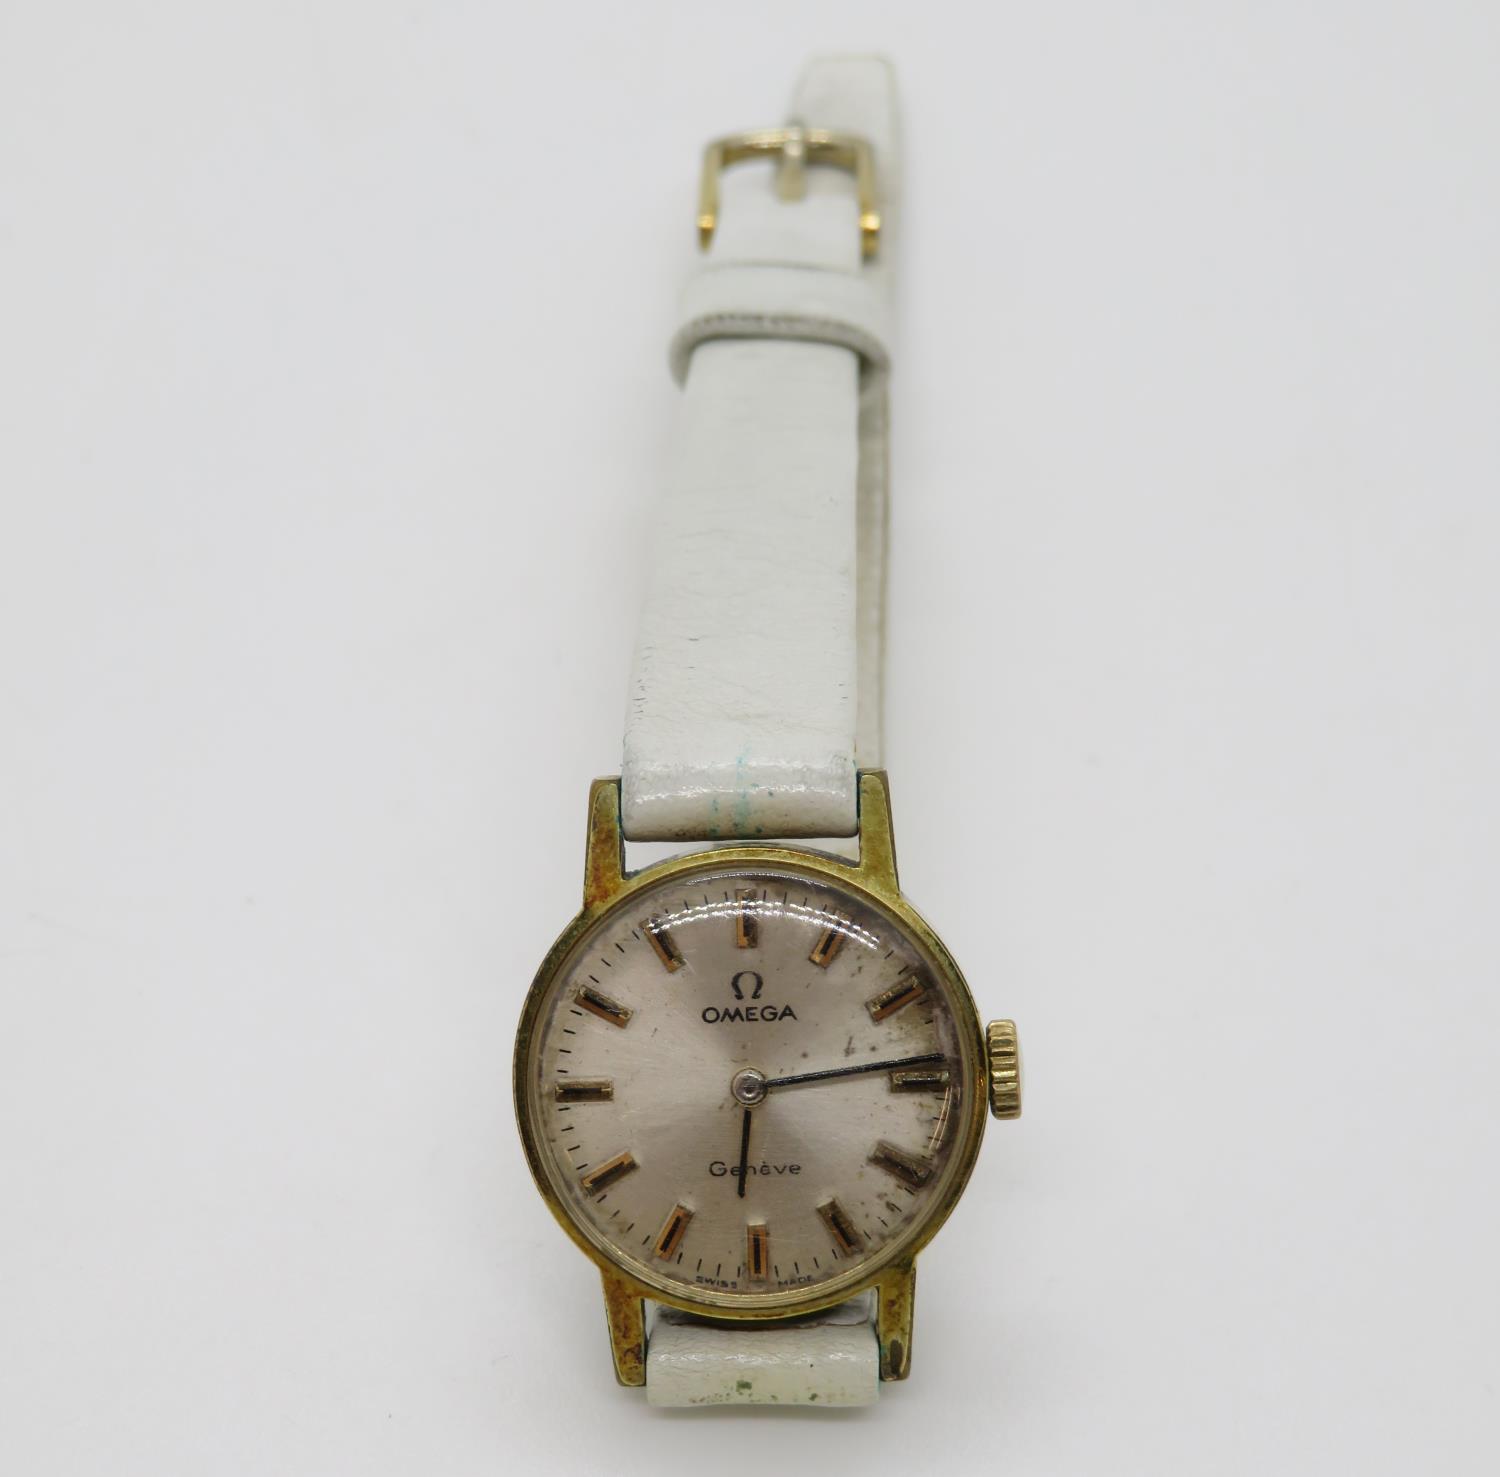 Lady's Omega manual wind watch Geneve - fully working - Image 3 of 4